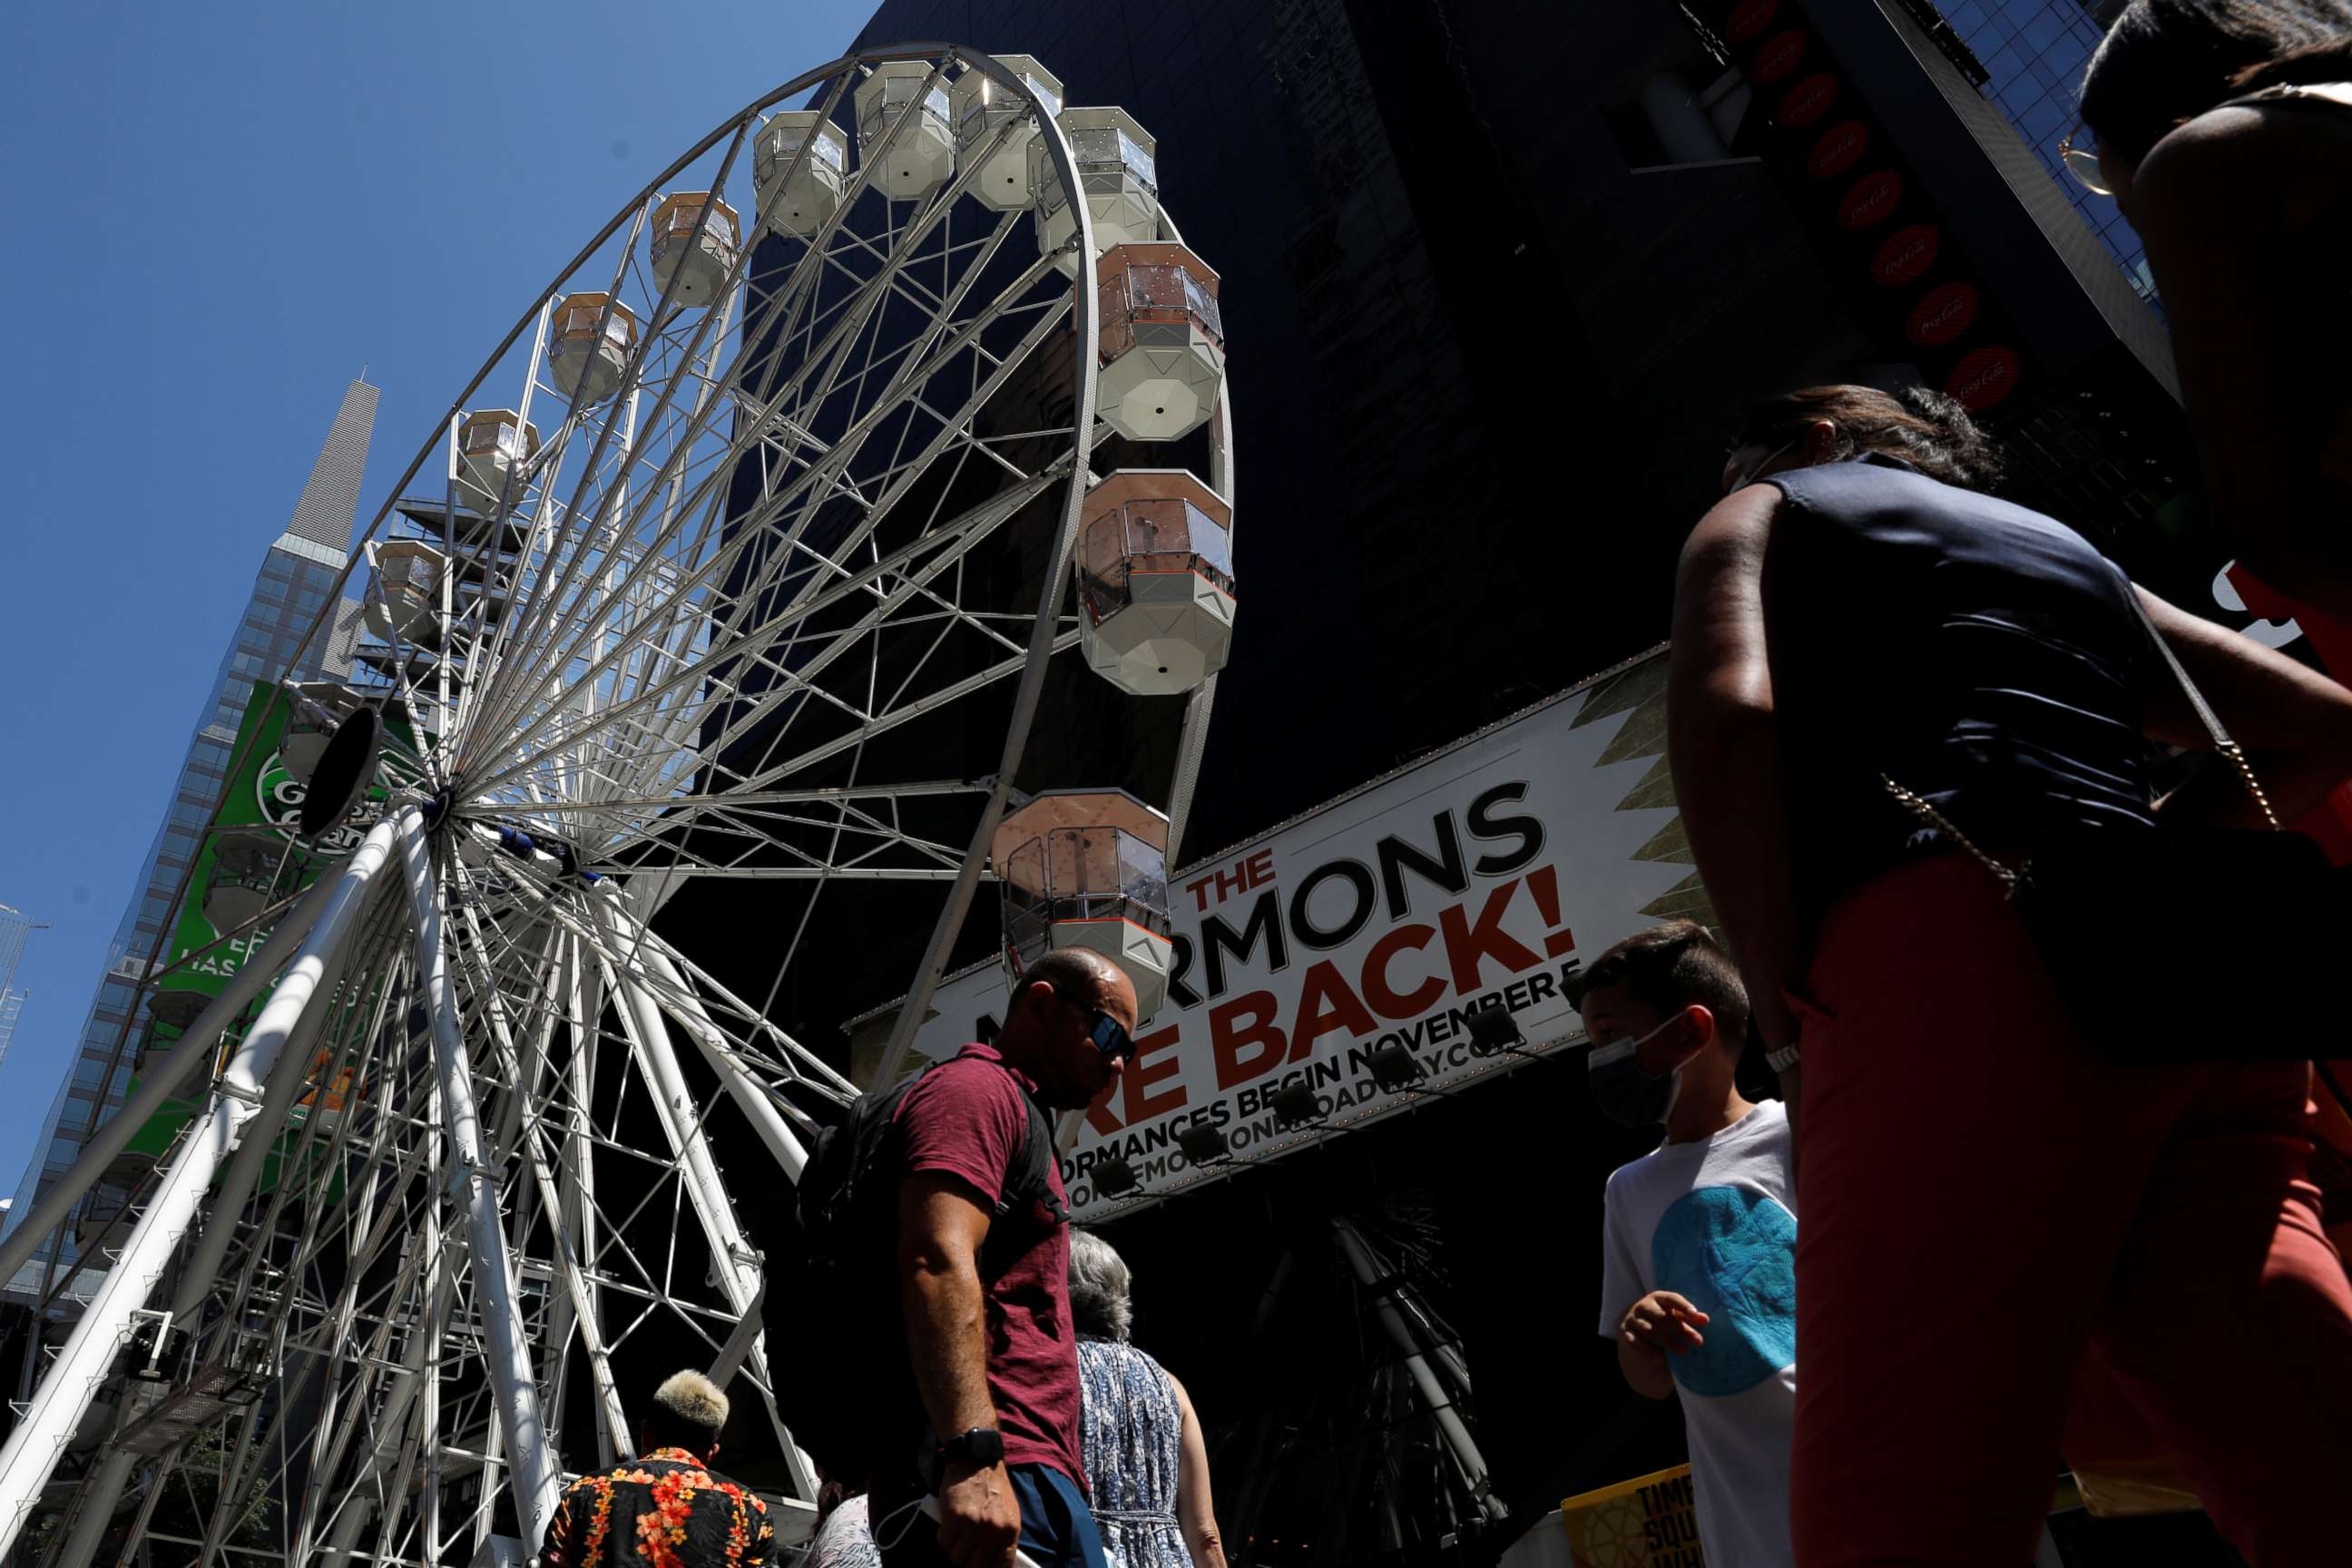 PHOTO: People queue to ride the Times Square Wheel, a Ferris wheel constructed in Times Square, in New York, Aug. 25, 2021.